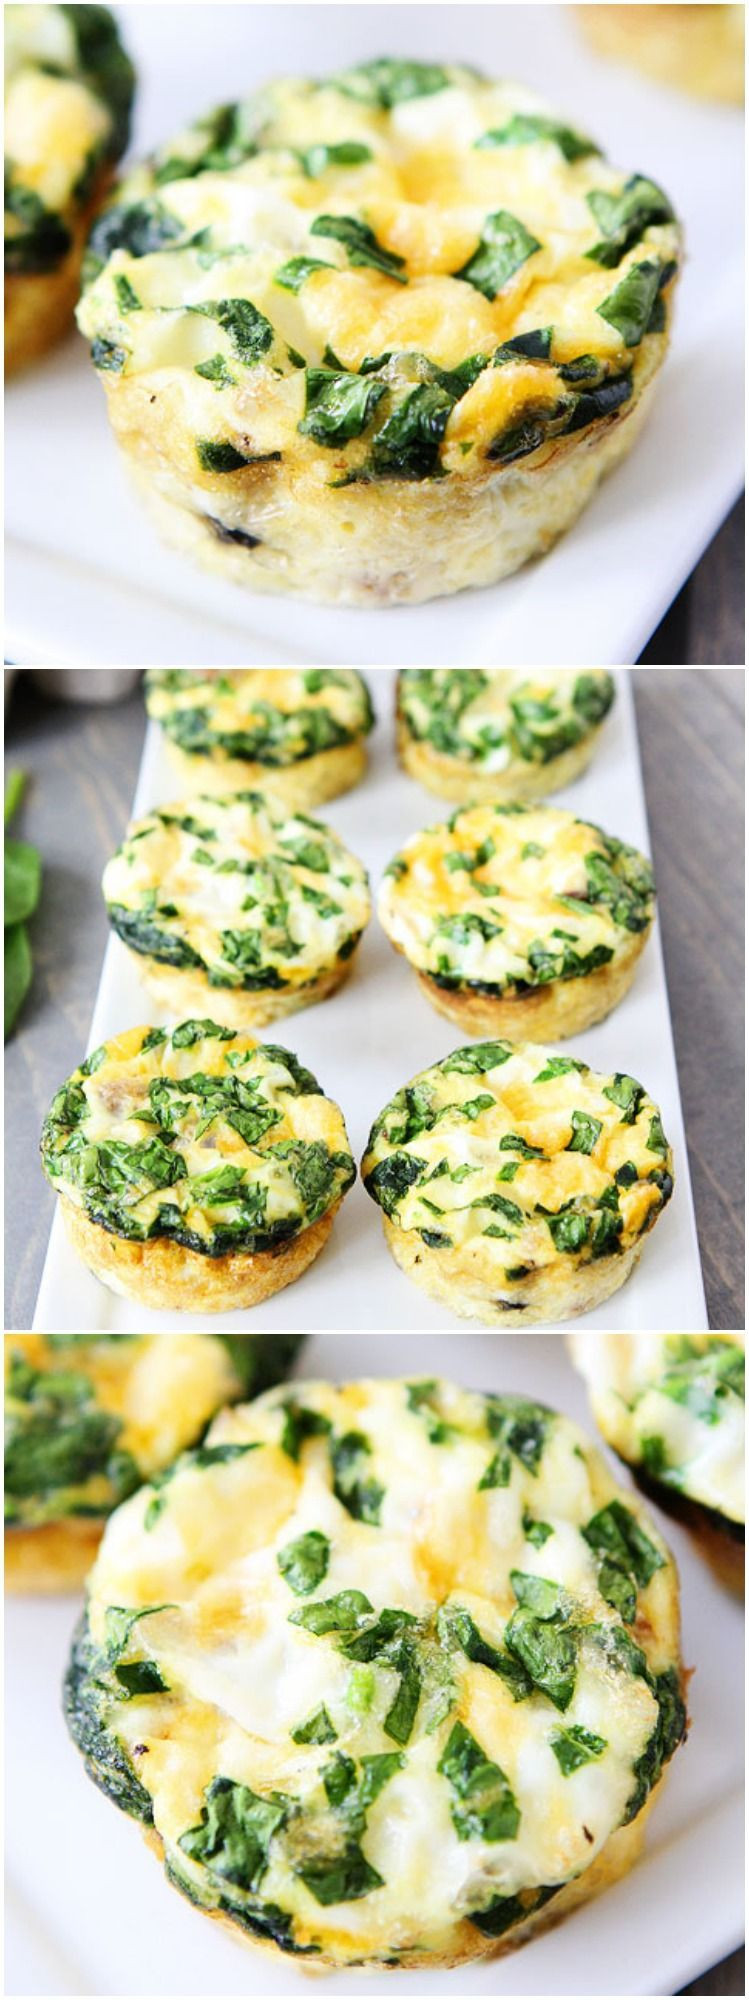 Healthy Breakfast Egg Muffins With Spinach
 Egg Muffins with Sausage Spinach and Cheese Recipe on